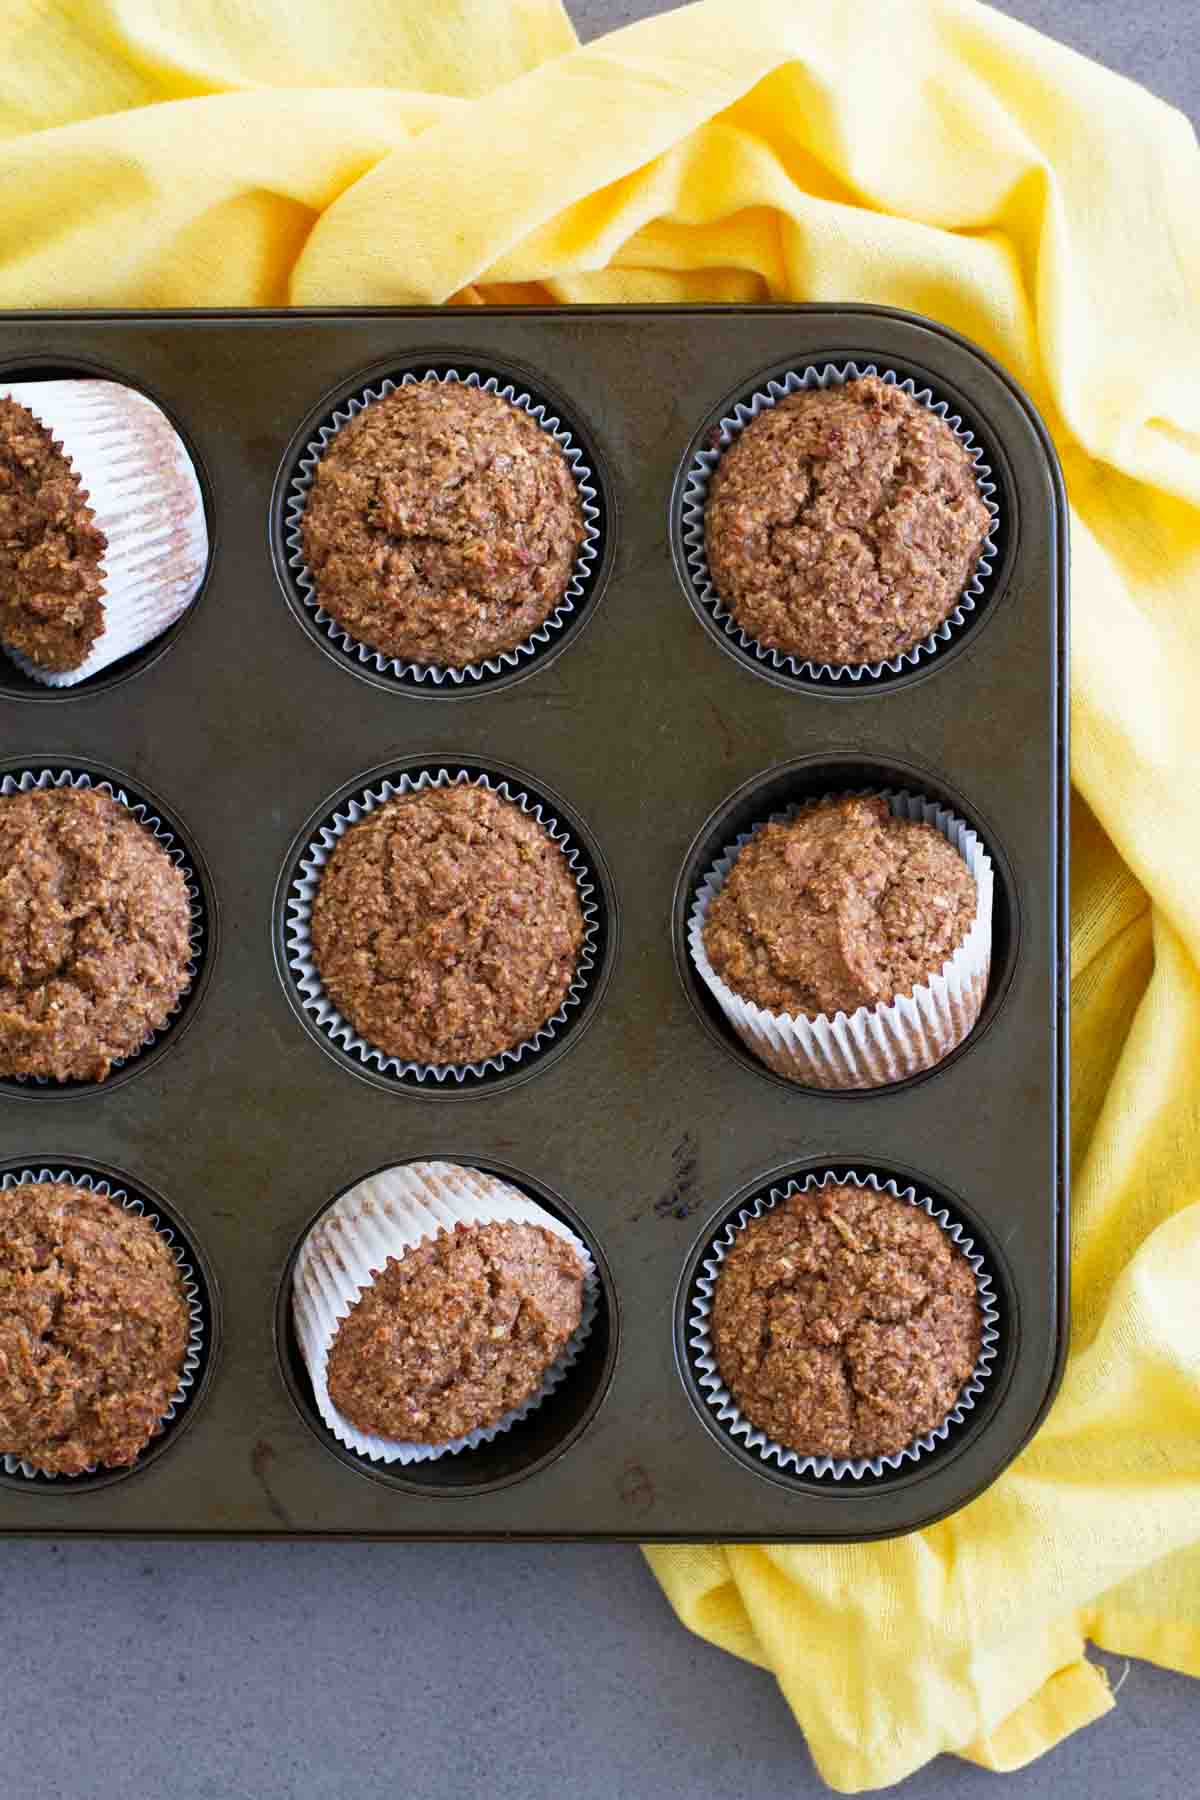 Healthy Whole Wheat Bran Muffins in pan